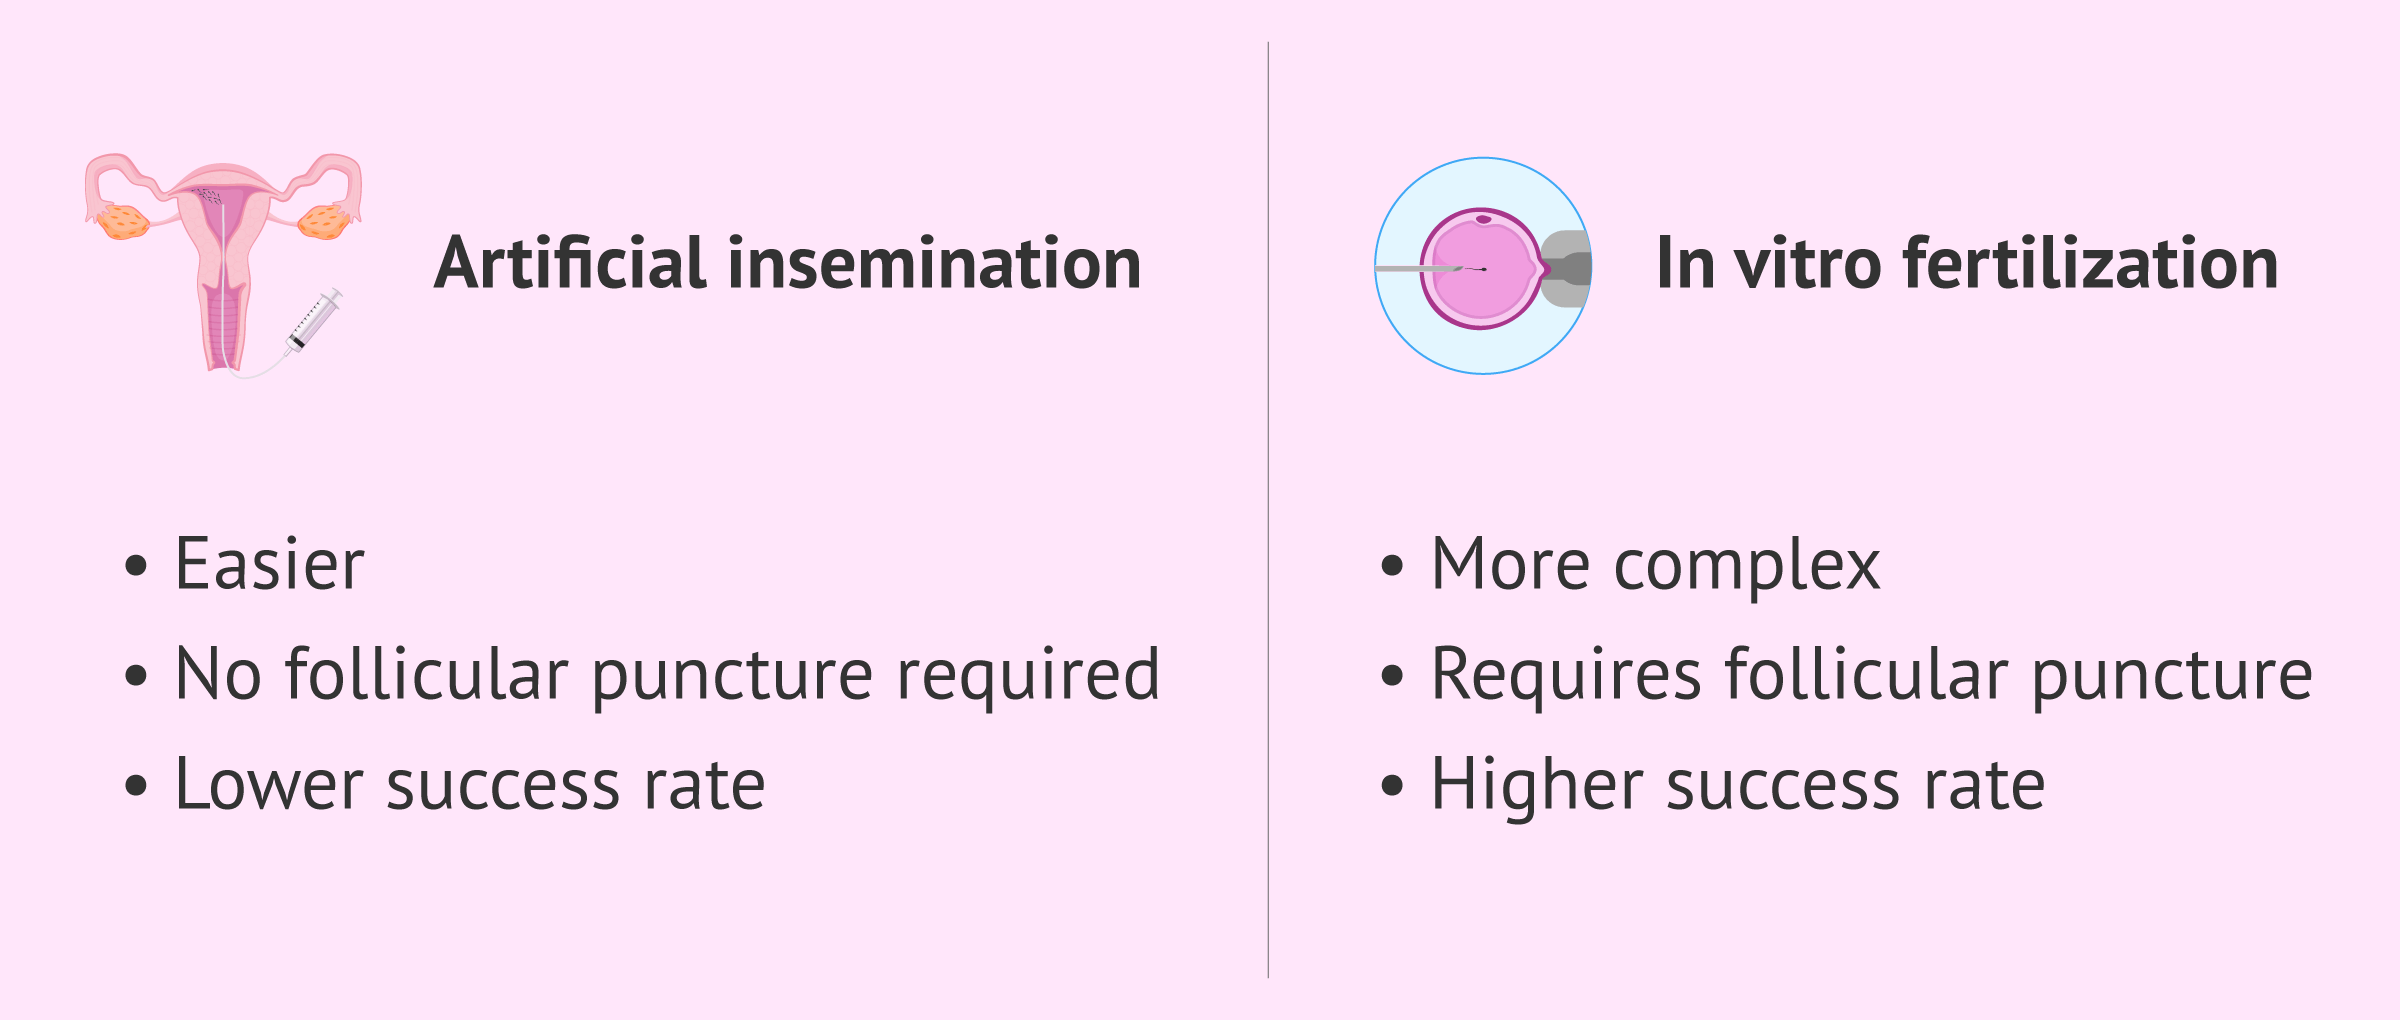 Differences between AI and IVF